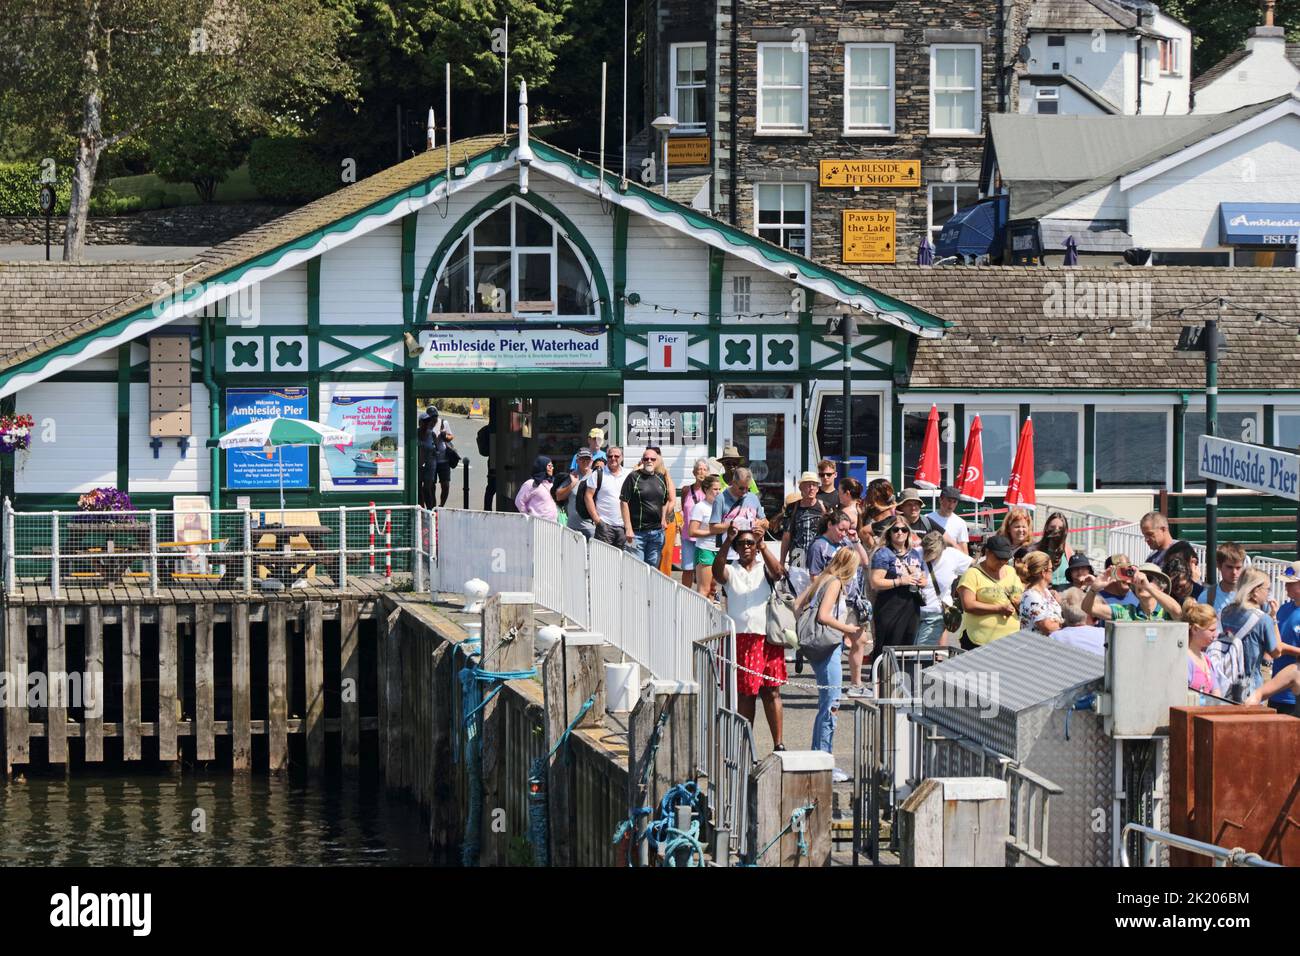 Tourists queue for boats, Ambleside Pier, Waterhead, Lake Windermere Stock Photo